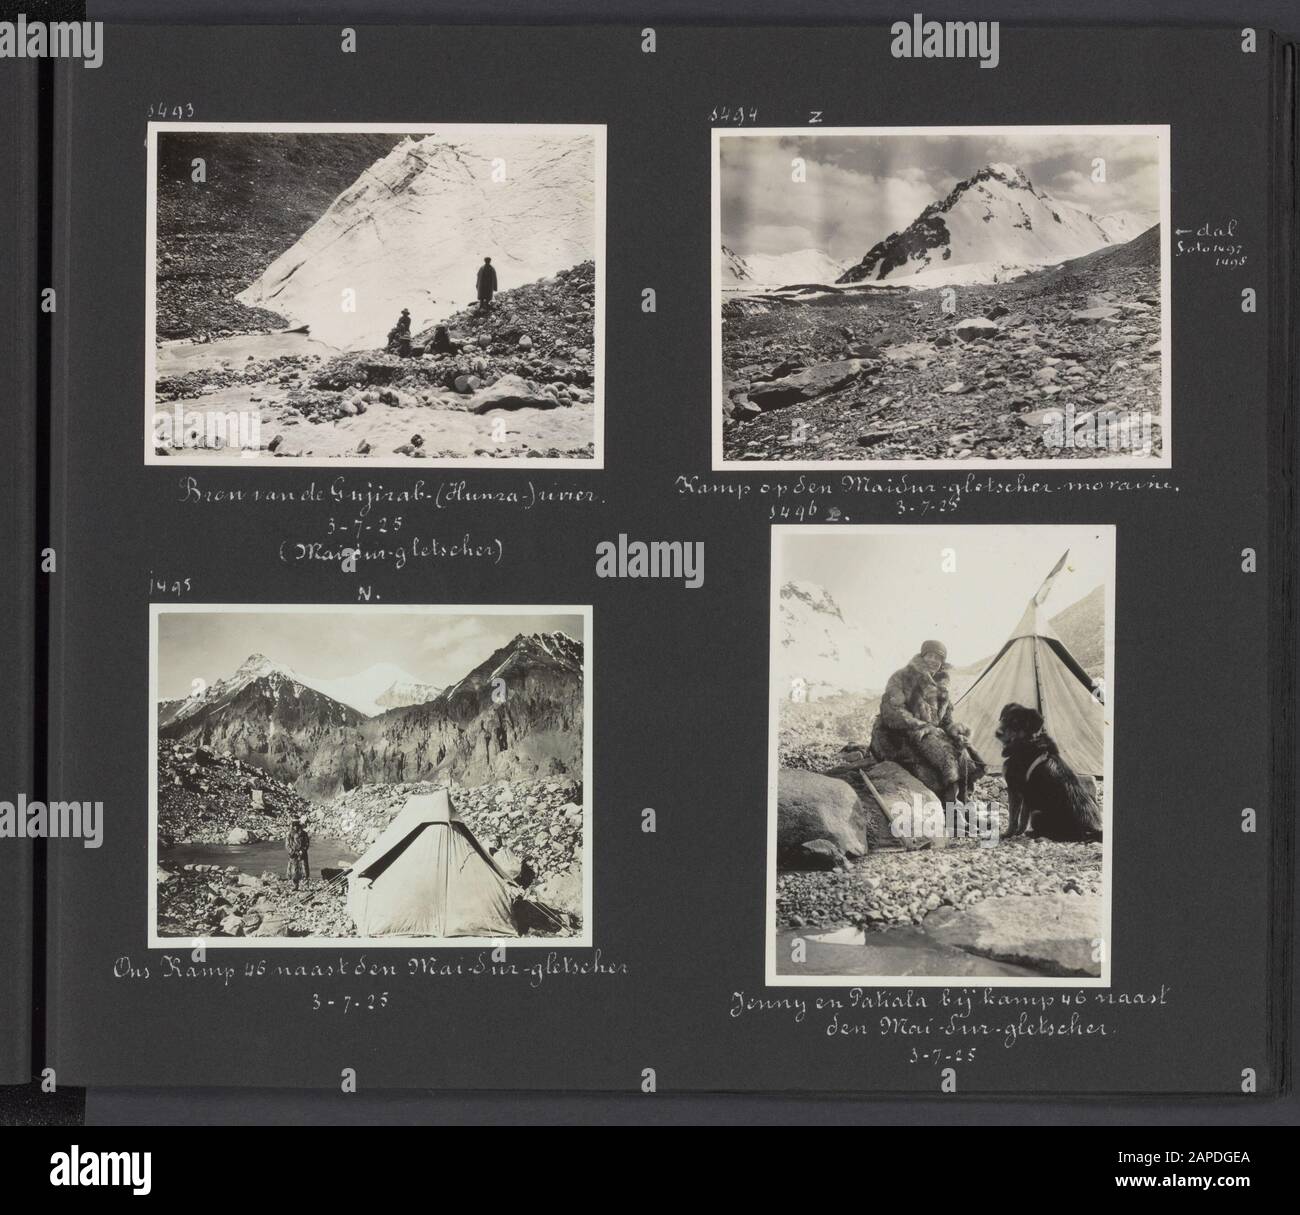 Photo Album Fisherman: Second Karakorum Expedition Description: Album sheet with four pictures. Top left: glacial tongue of the Maidur glacier, the source of the Gujirab (Hunza River respectively). Top right: camp site on the side moraine of the Maidur glacier. Bottom left: Camp 46 on the side moraine nests the Maidur glacier. Bottom right: Jenny Fishers-Hooft and Patiala for the tent in camp 46 next to the Maidur Glacier Annotation: The dog Patiala, a Tibetan mastiff, was a gift from the Maharaja of Patiala to Jenny Fisher-Hooft in 1925 Date: 1 January 1925 Location: Gujirab, Hunza, Karakorum Stock Photo